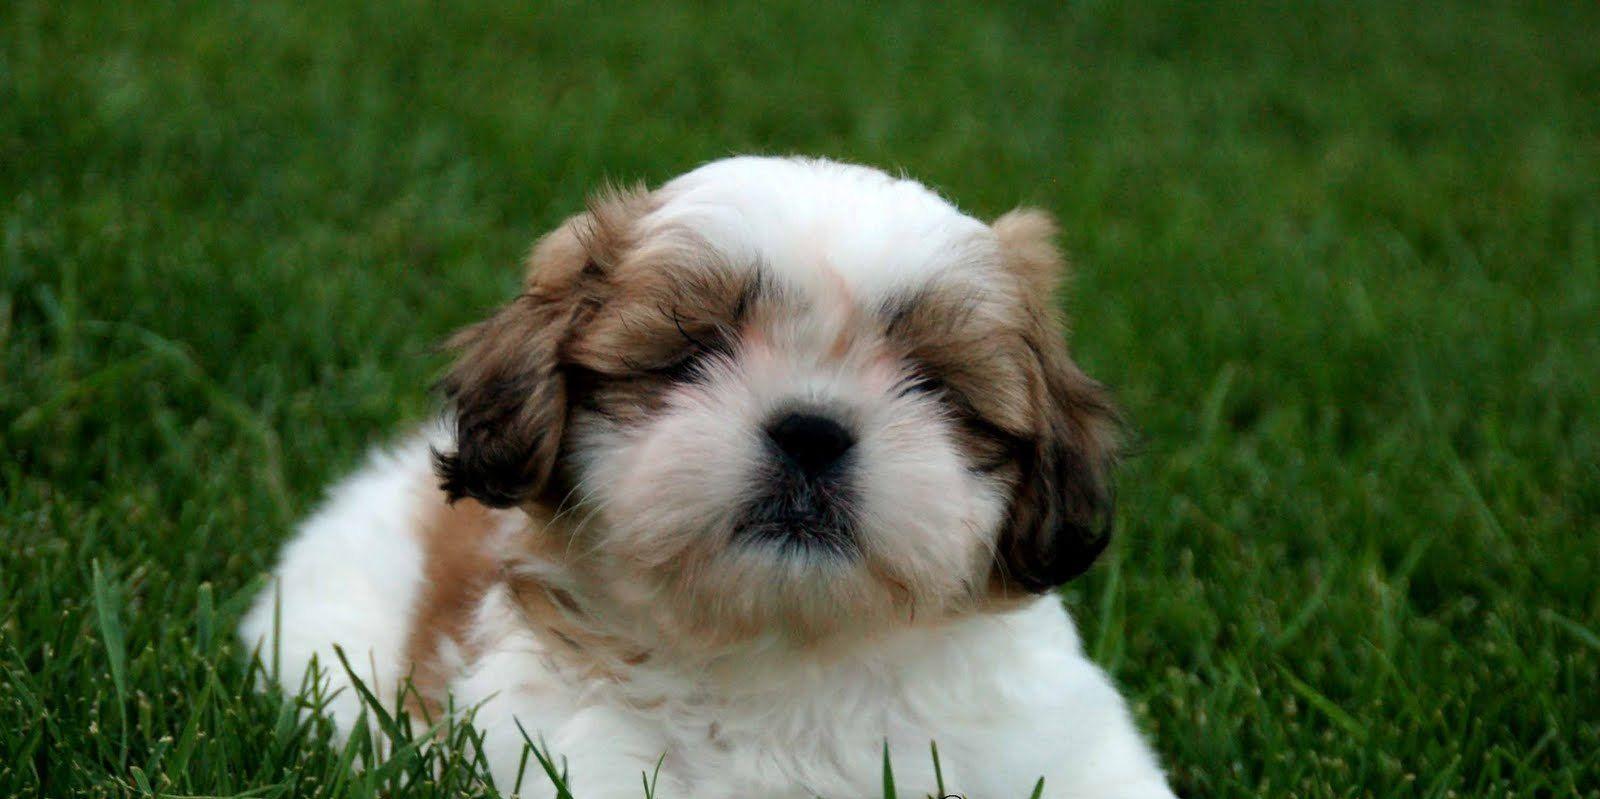 Shih Tzu Wallpaper And Picture Of A Puppy High Quality For Laptop